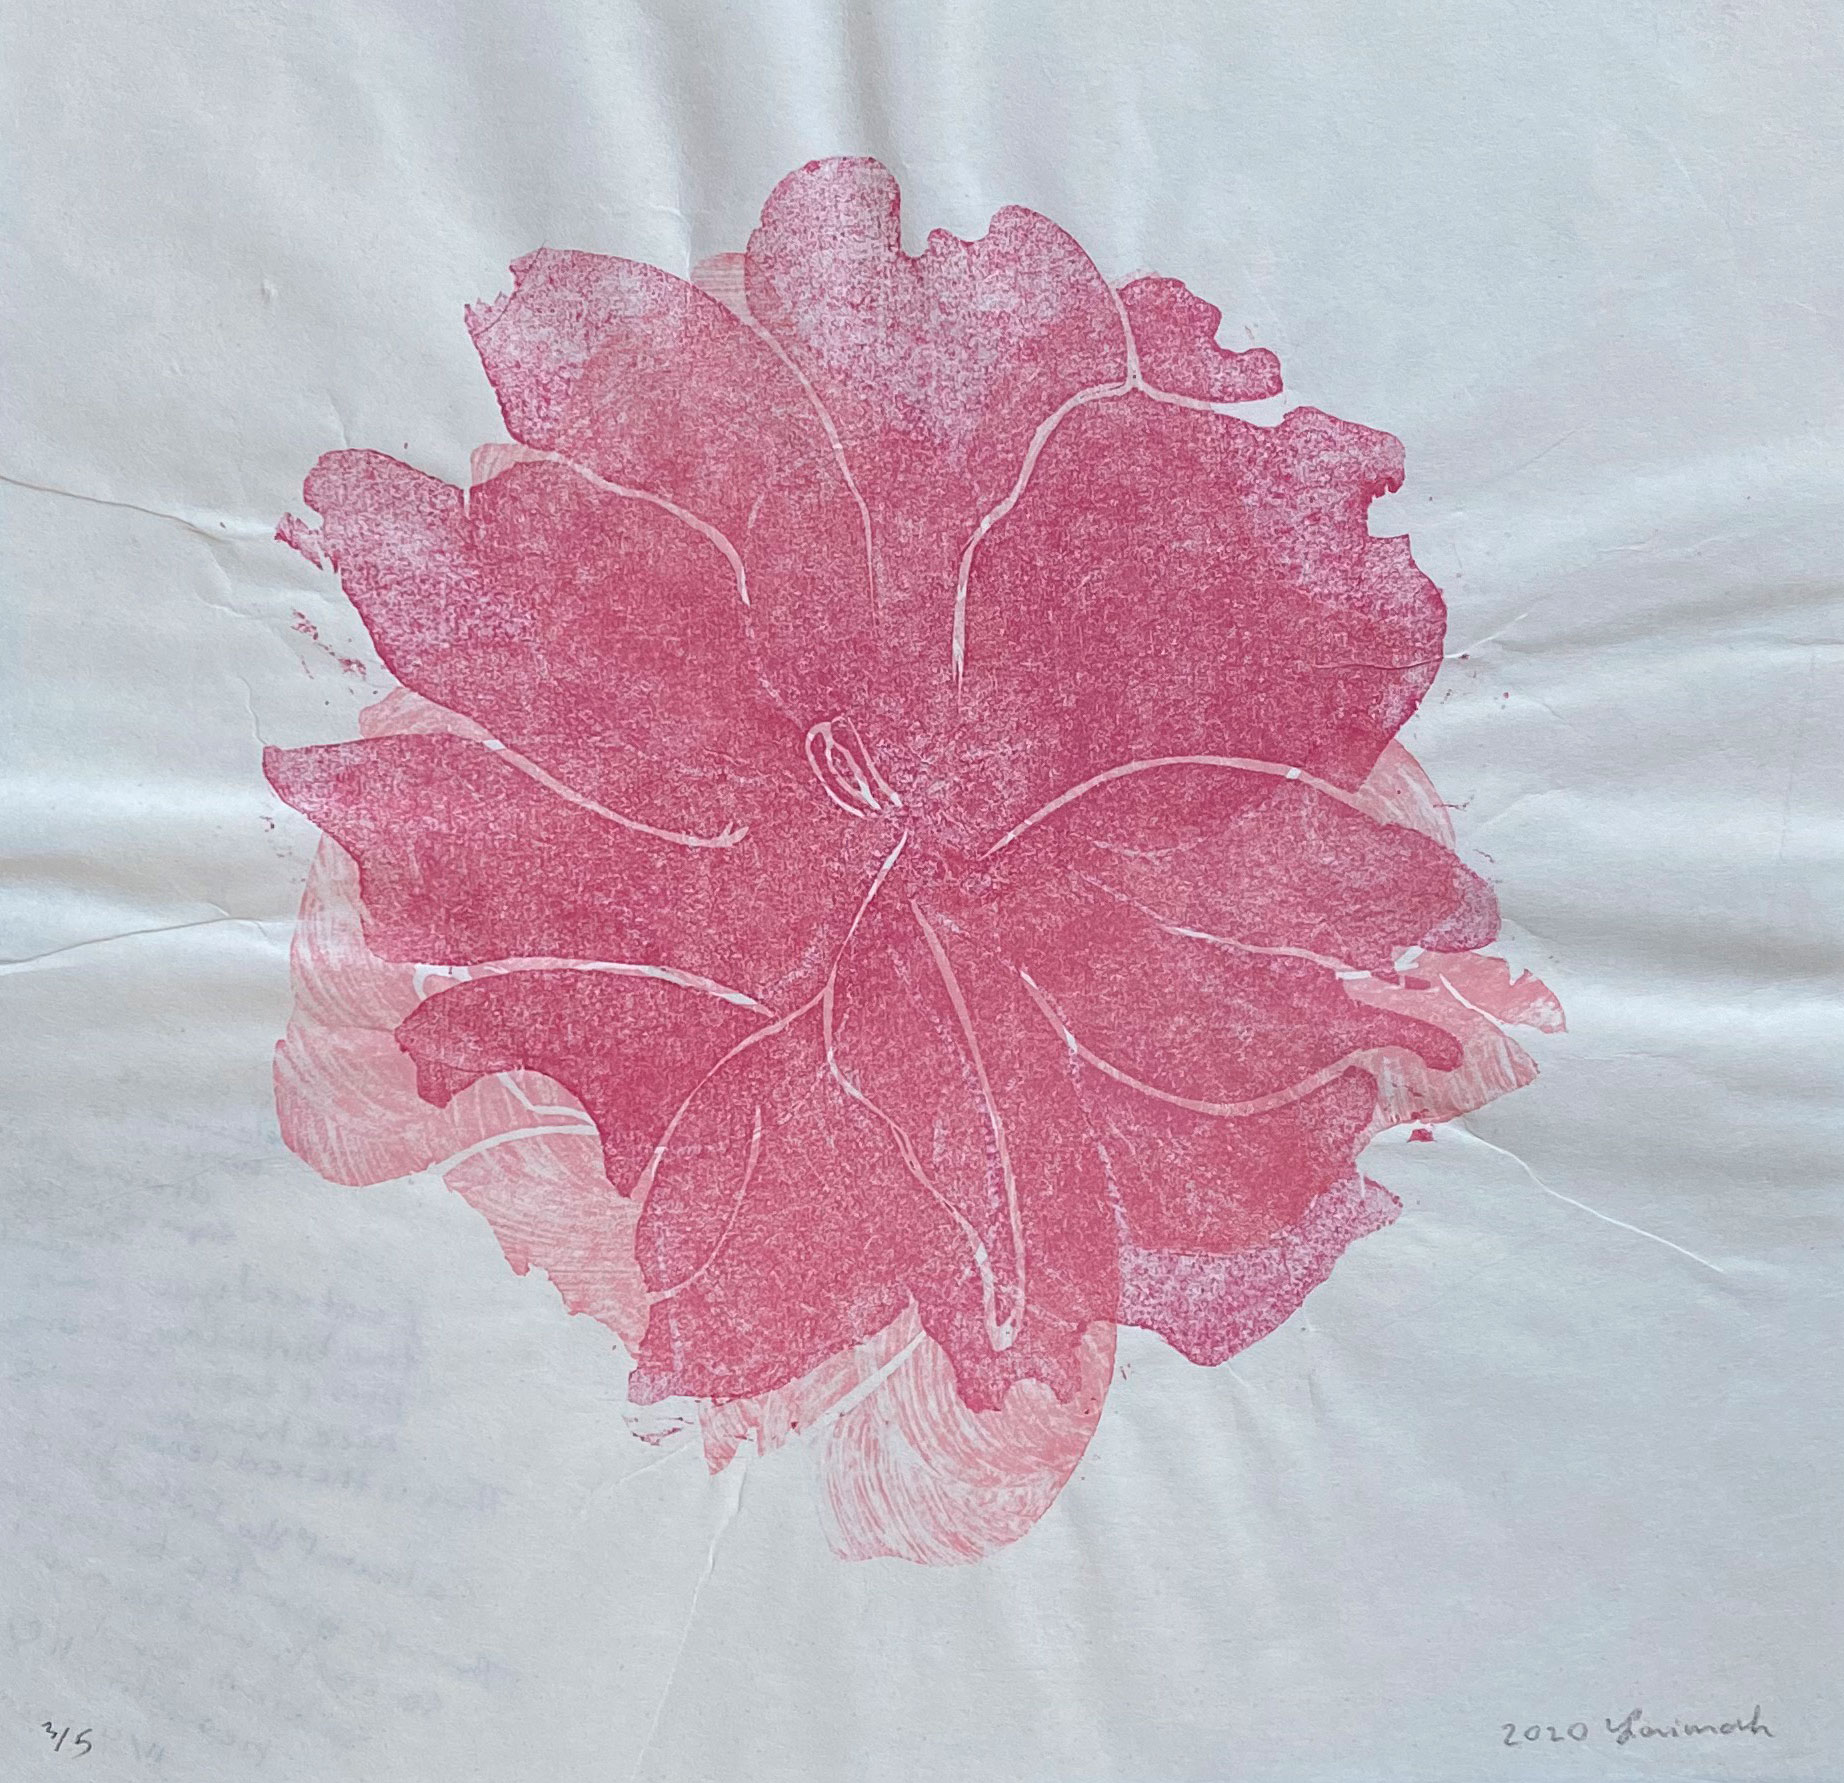 a depiction of a cherry blossom flower, dark pink flower layered over a light pink flower, Woodblock print on Okawara paper, 12 x 12 inches, August 2020, Edition: 5